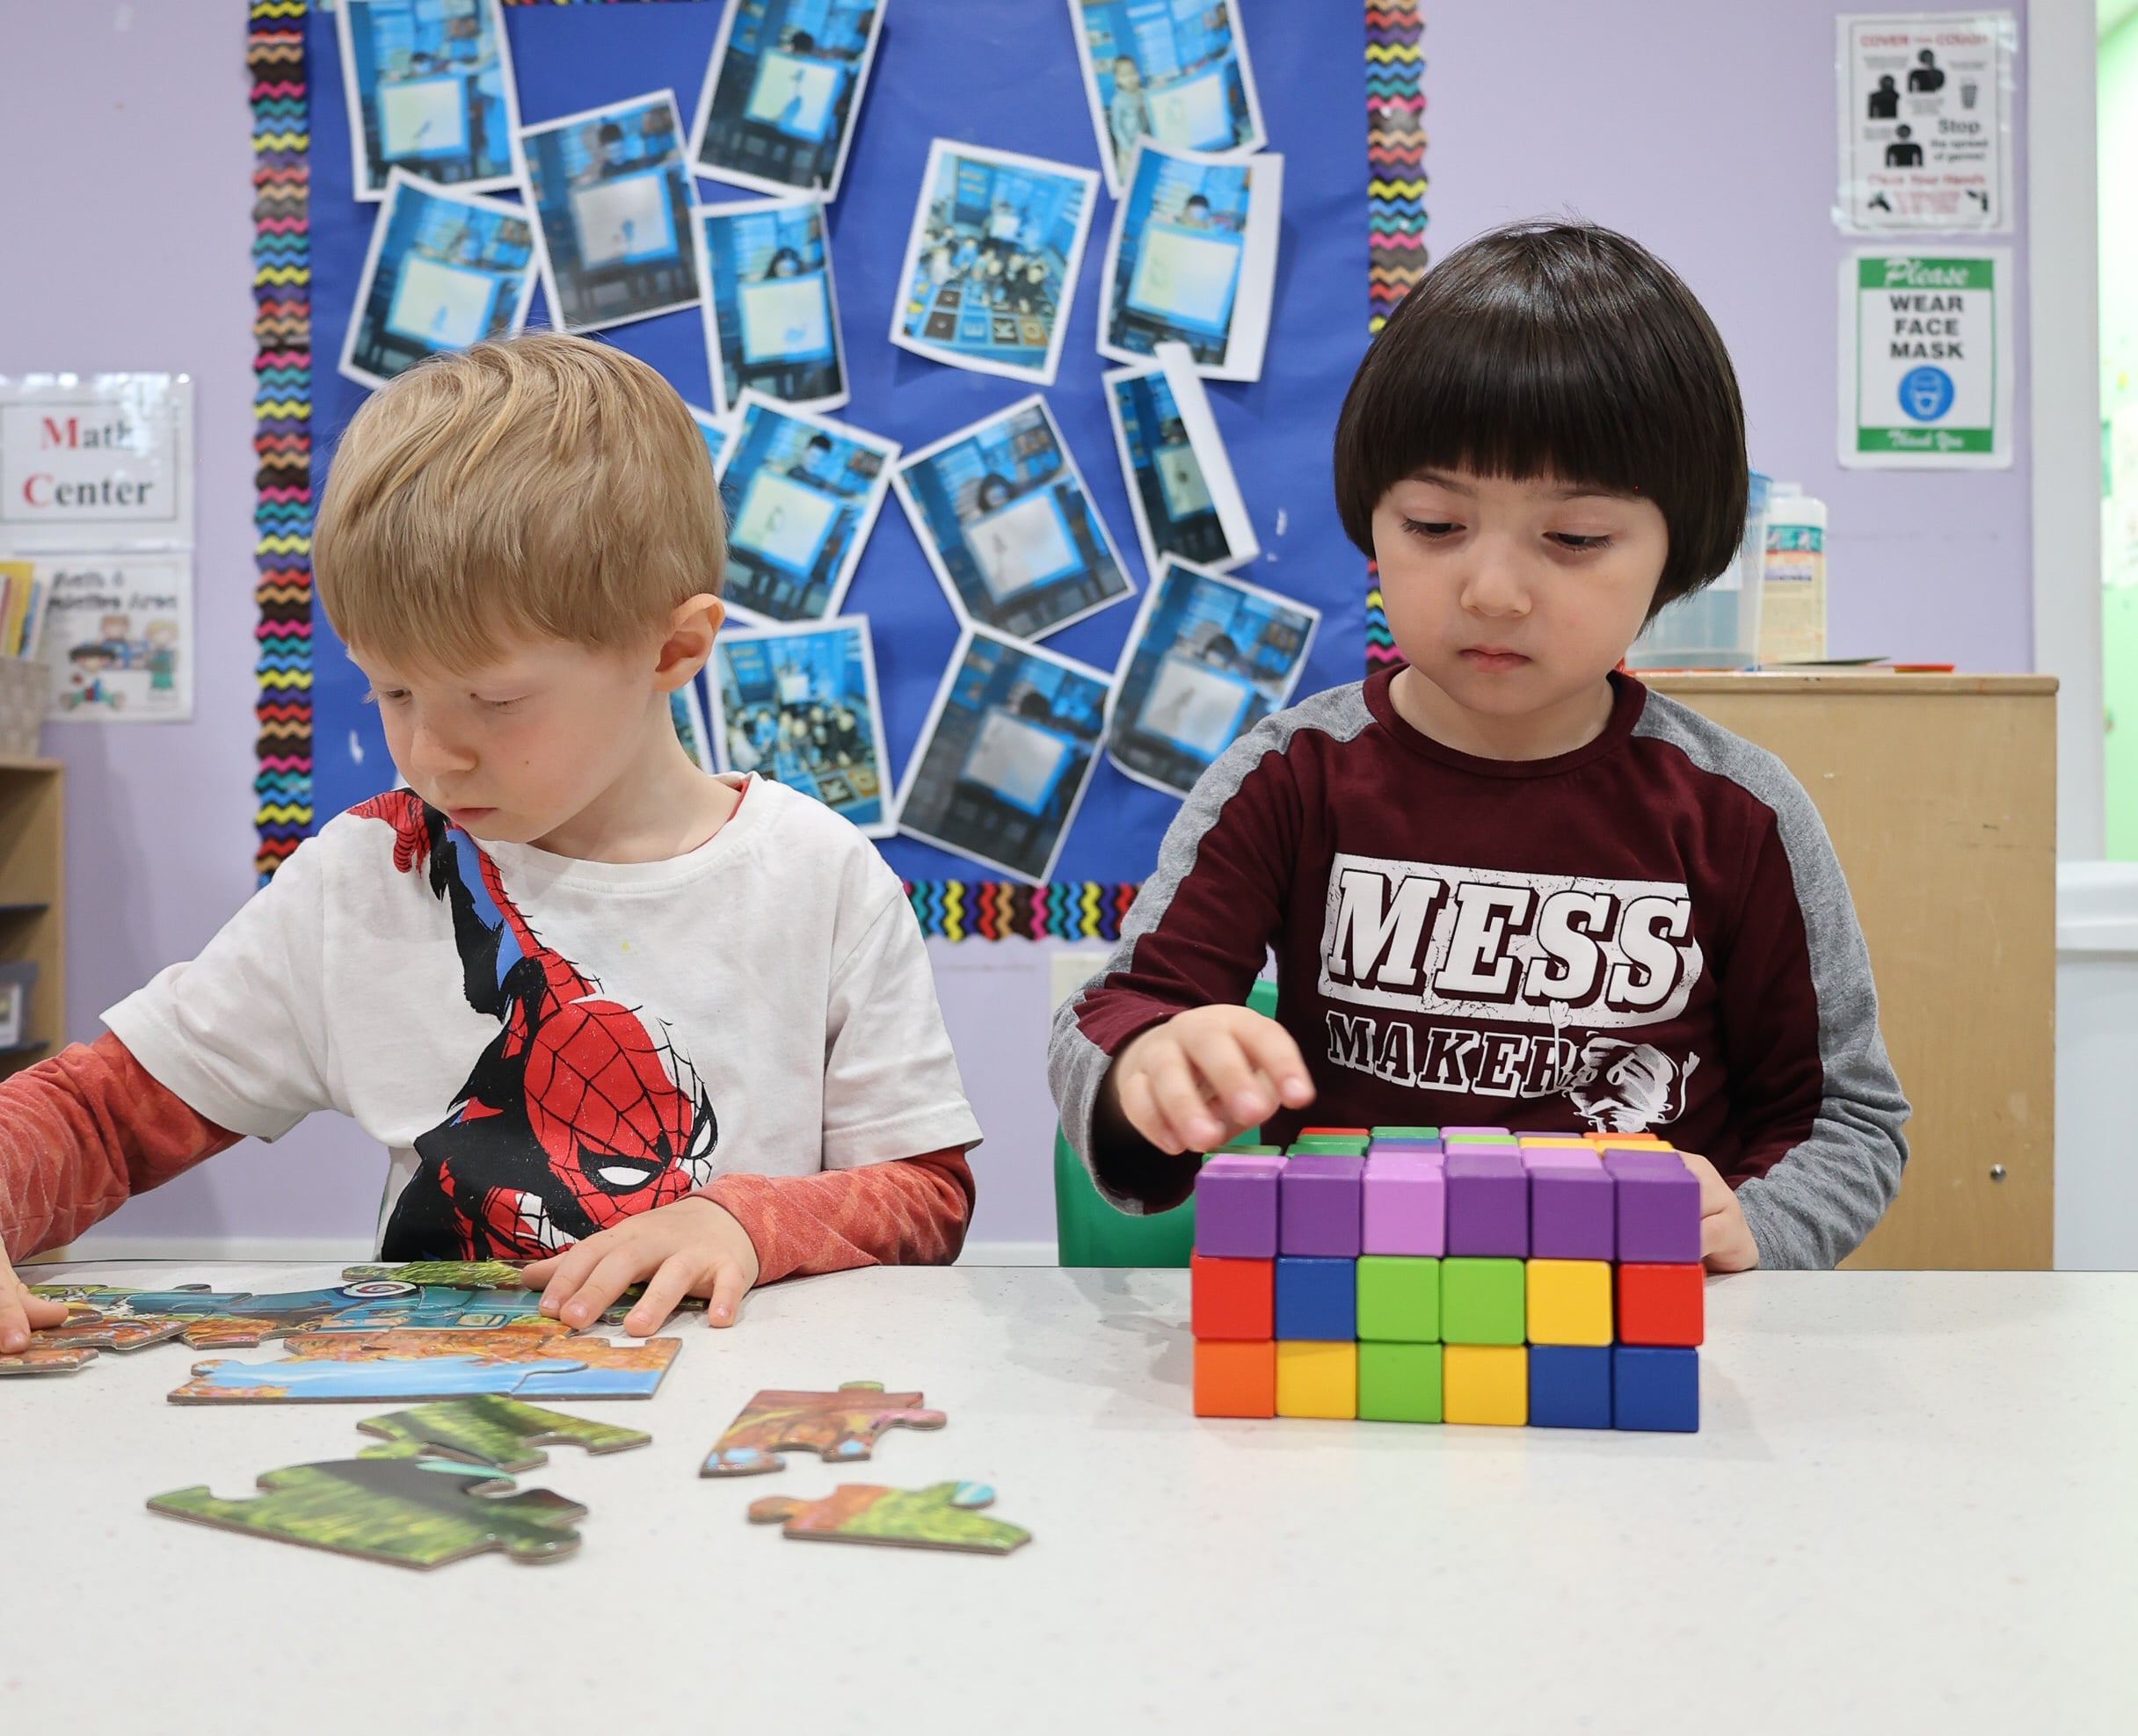 Two children at daycare focusing on assembling a puzzle and building with colorful blocks